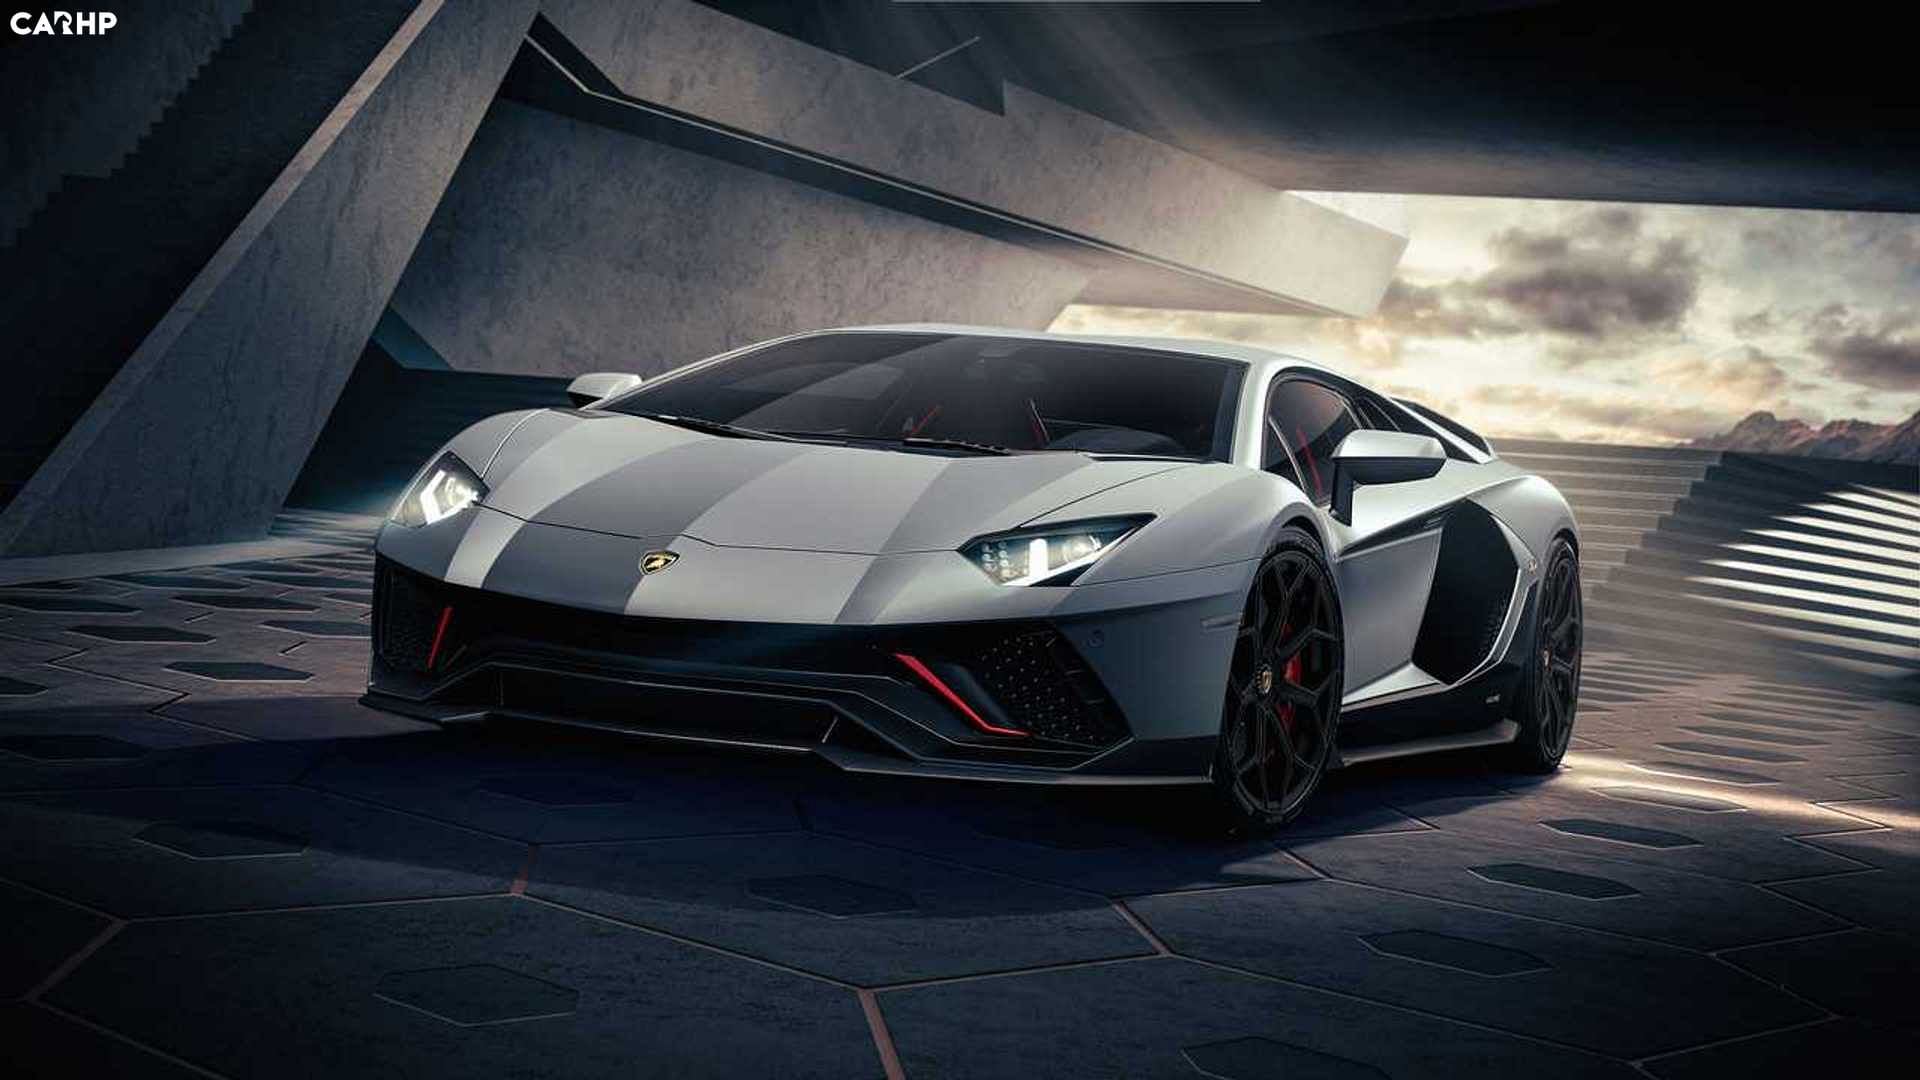 The Top 10 Cheapest Lamborghini Cars To Look Out For In 2022